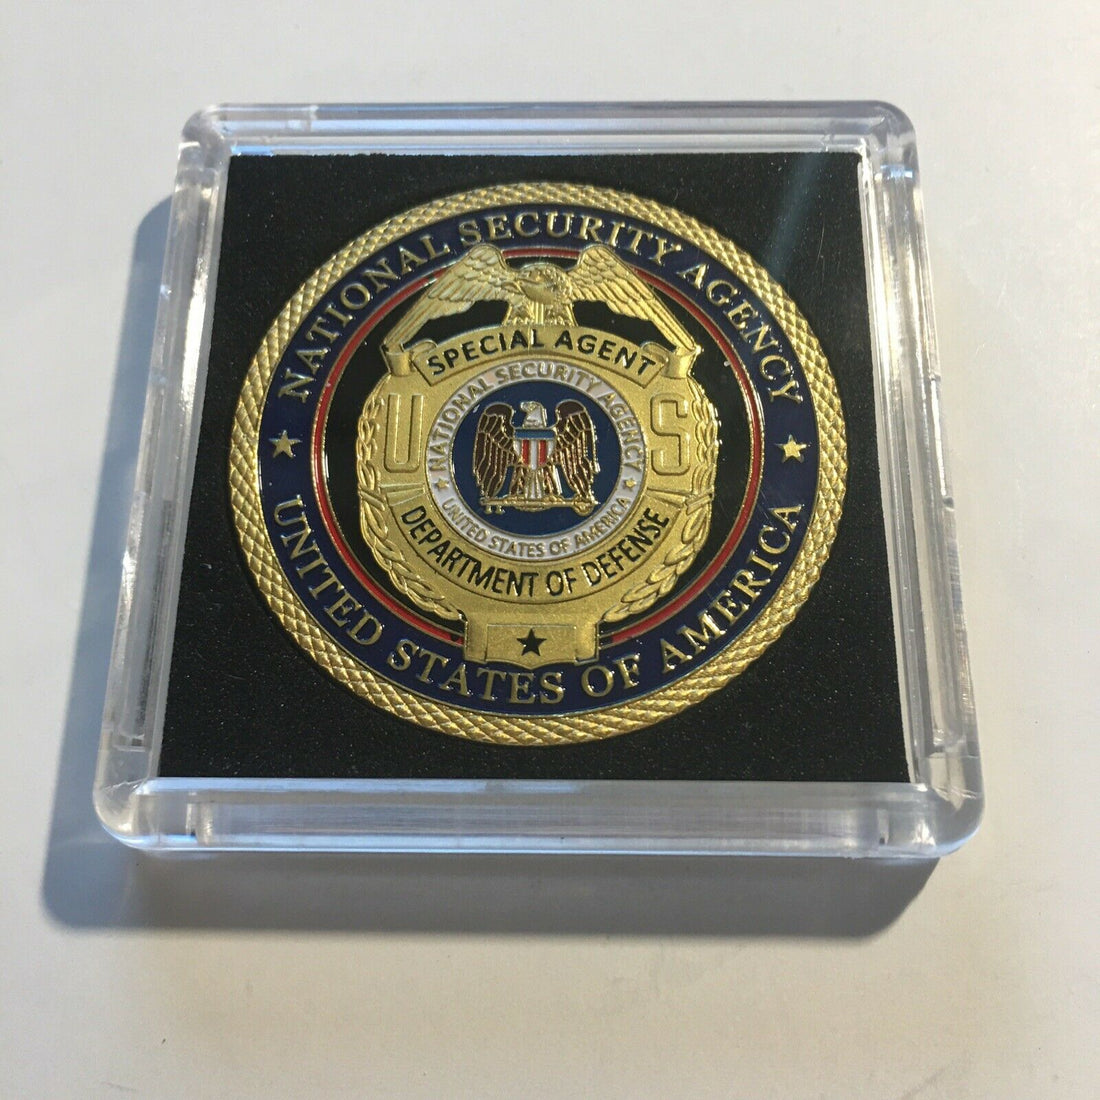 Buy NSA Coins on eBay-Ocean State Mint Coins for sale USA